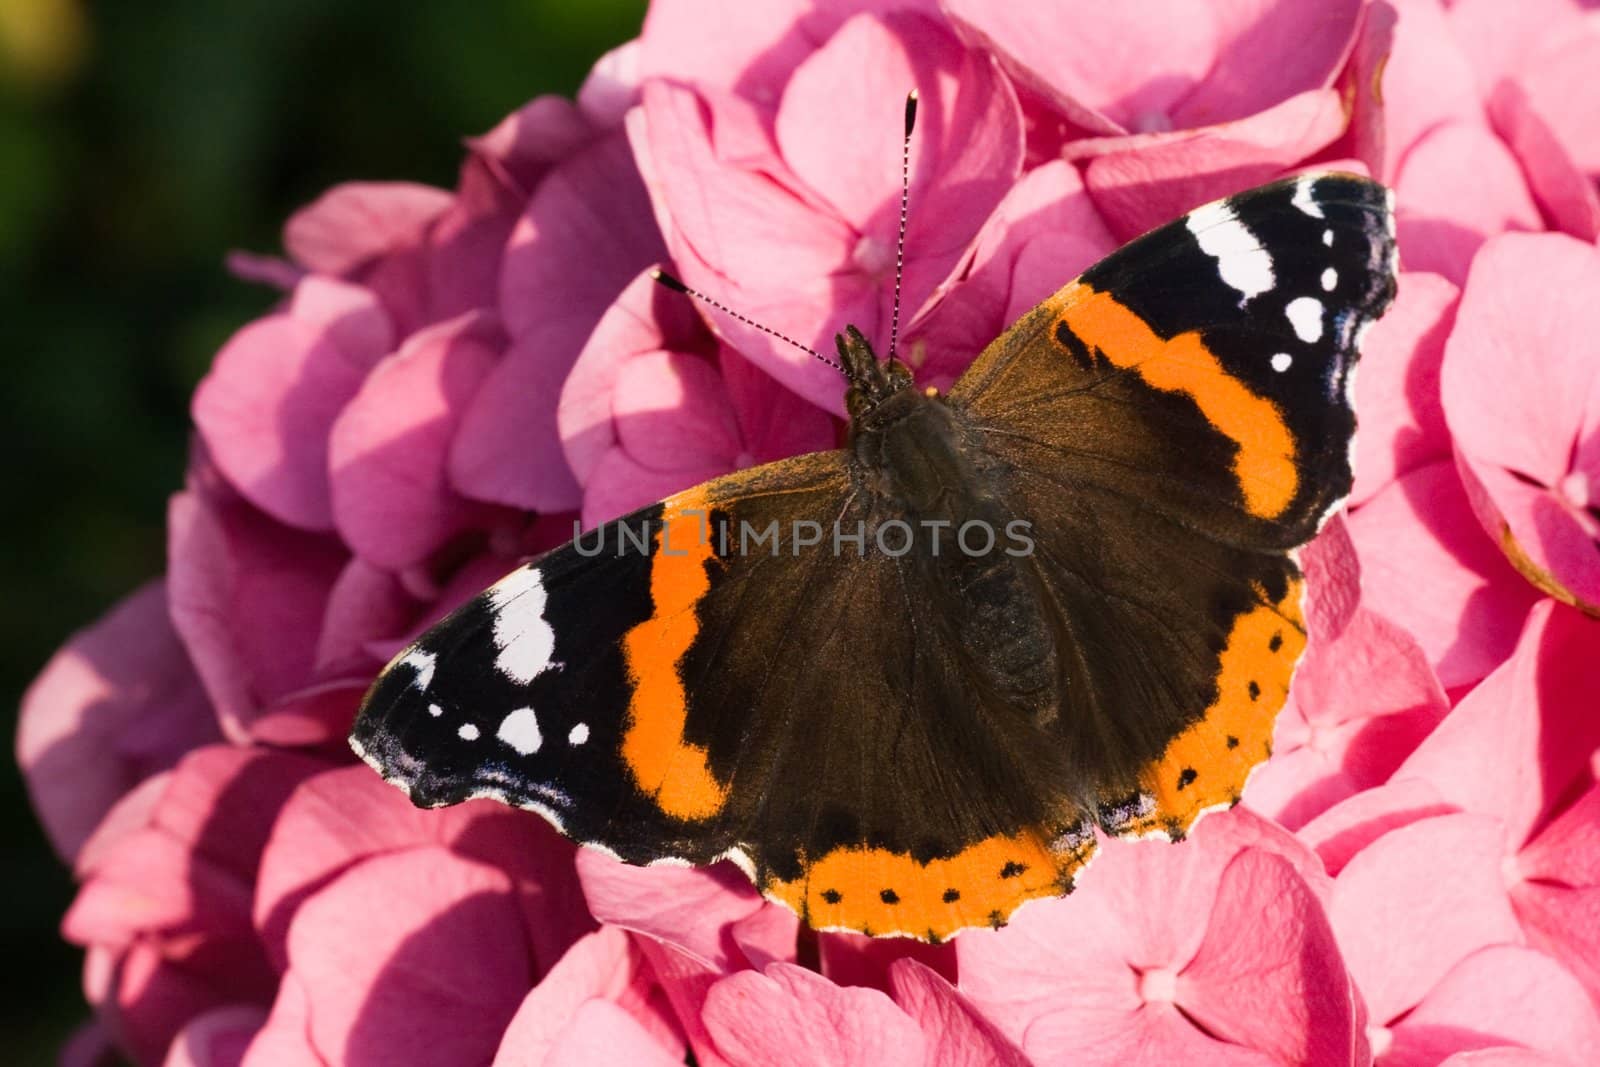 Red admiral on hydrangea by Colette